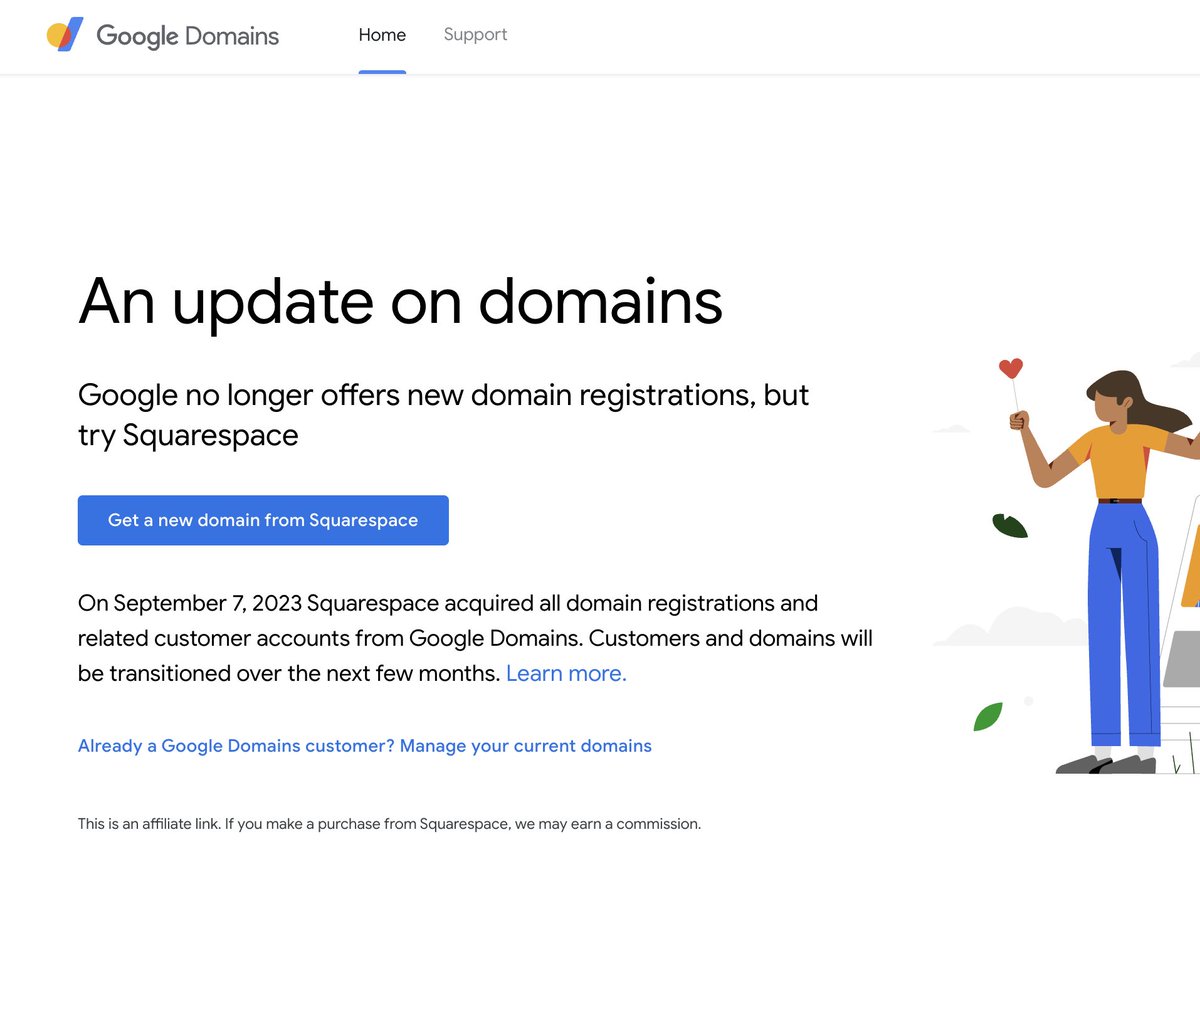 That was unexpected from #GoogleDomains..
Best alternatives to manage your domains with a great UX?